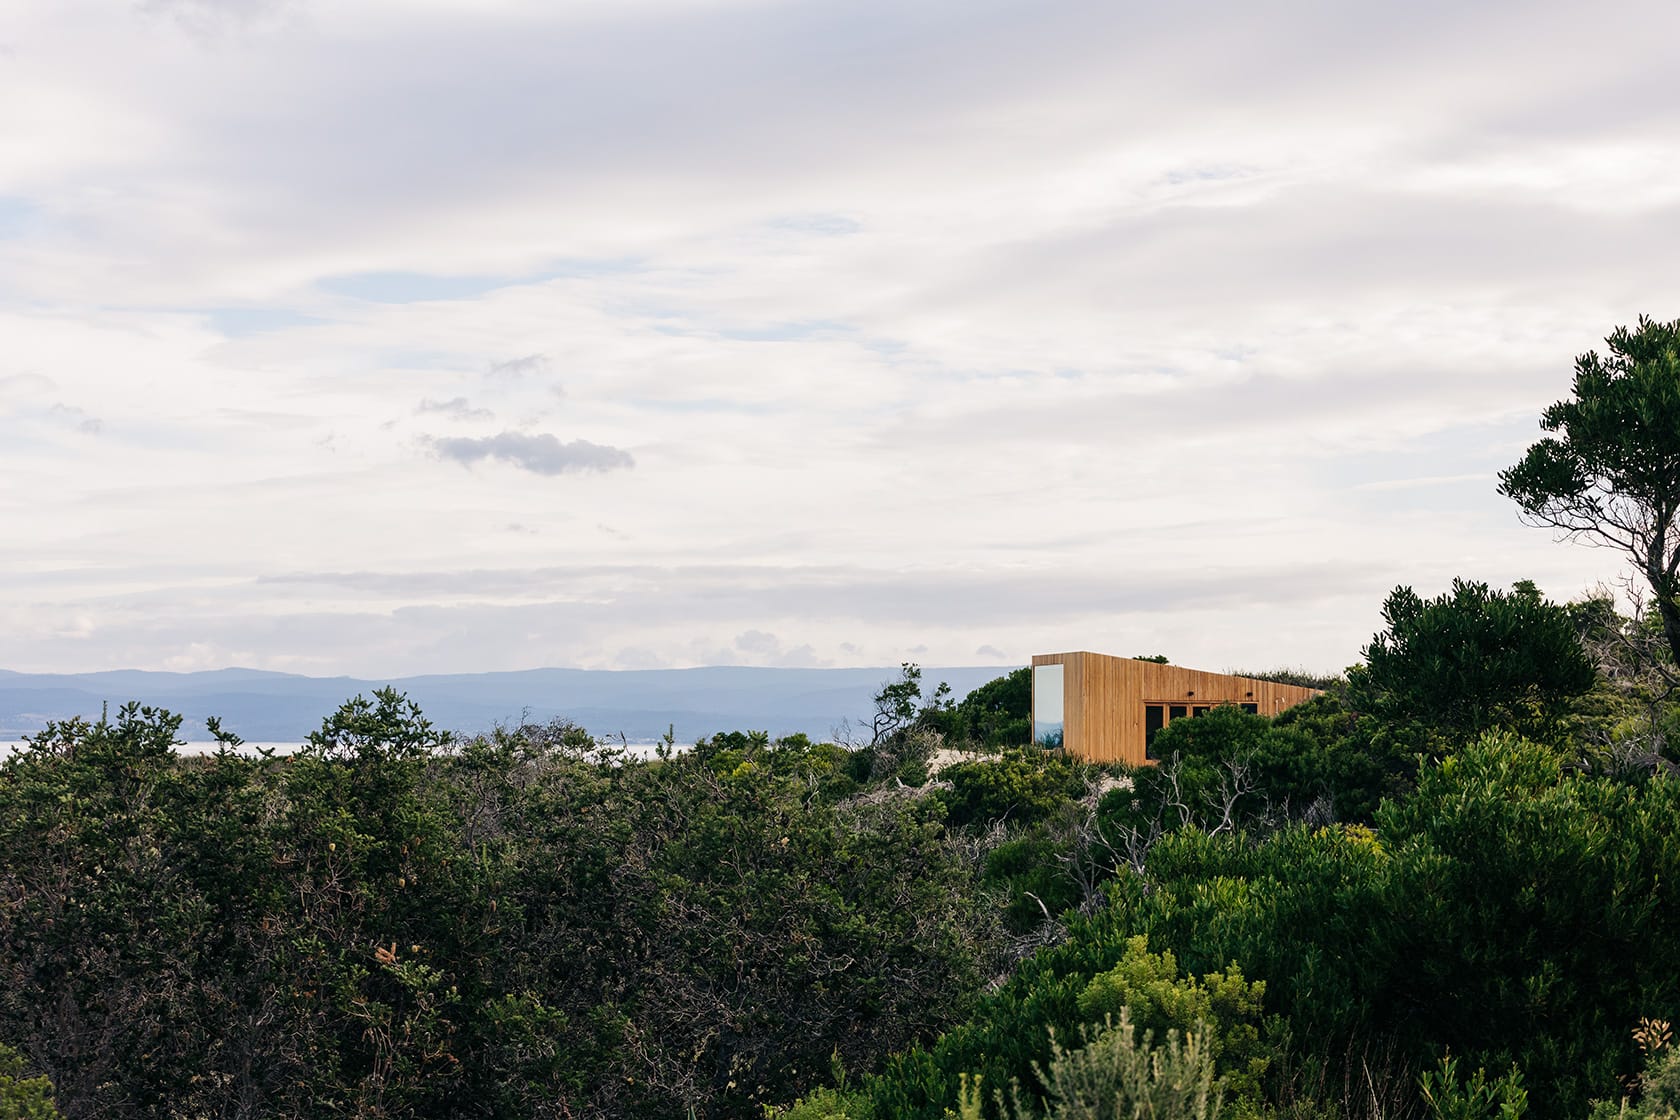 Studio Tasmania in Dolphin Sands, Tasmania. A distant, encompassing view of the studio from a high vantage point, illustrating its discreet presence within the coastal landscape. The building is a focal point amidst the dense greenery, with a dramatic mountainous backdrop that speaks to the wild beauty of Tasmania's east coast.